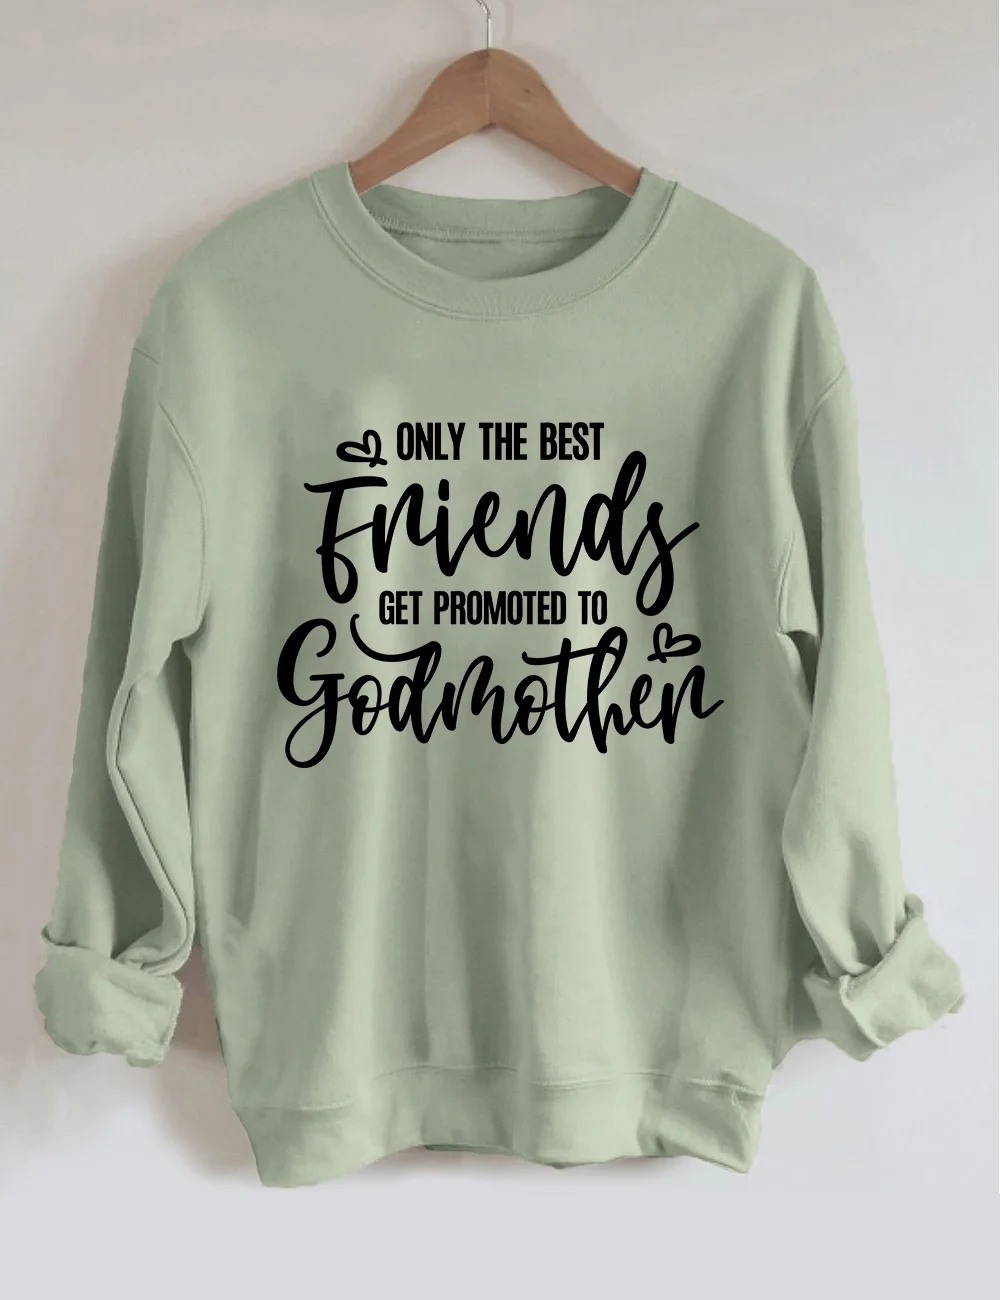 Only The Best Friends Get Promoted To Godmother Sweatshirt